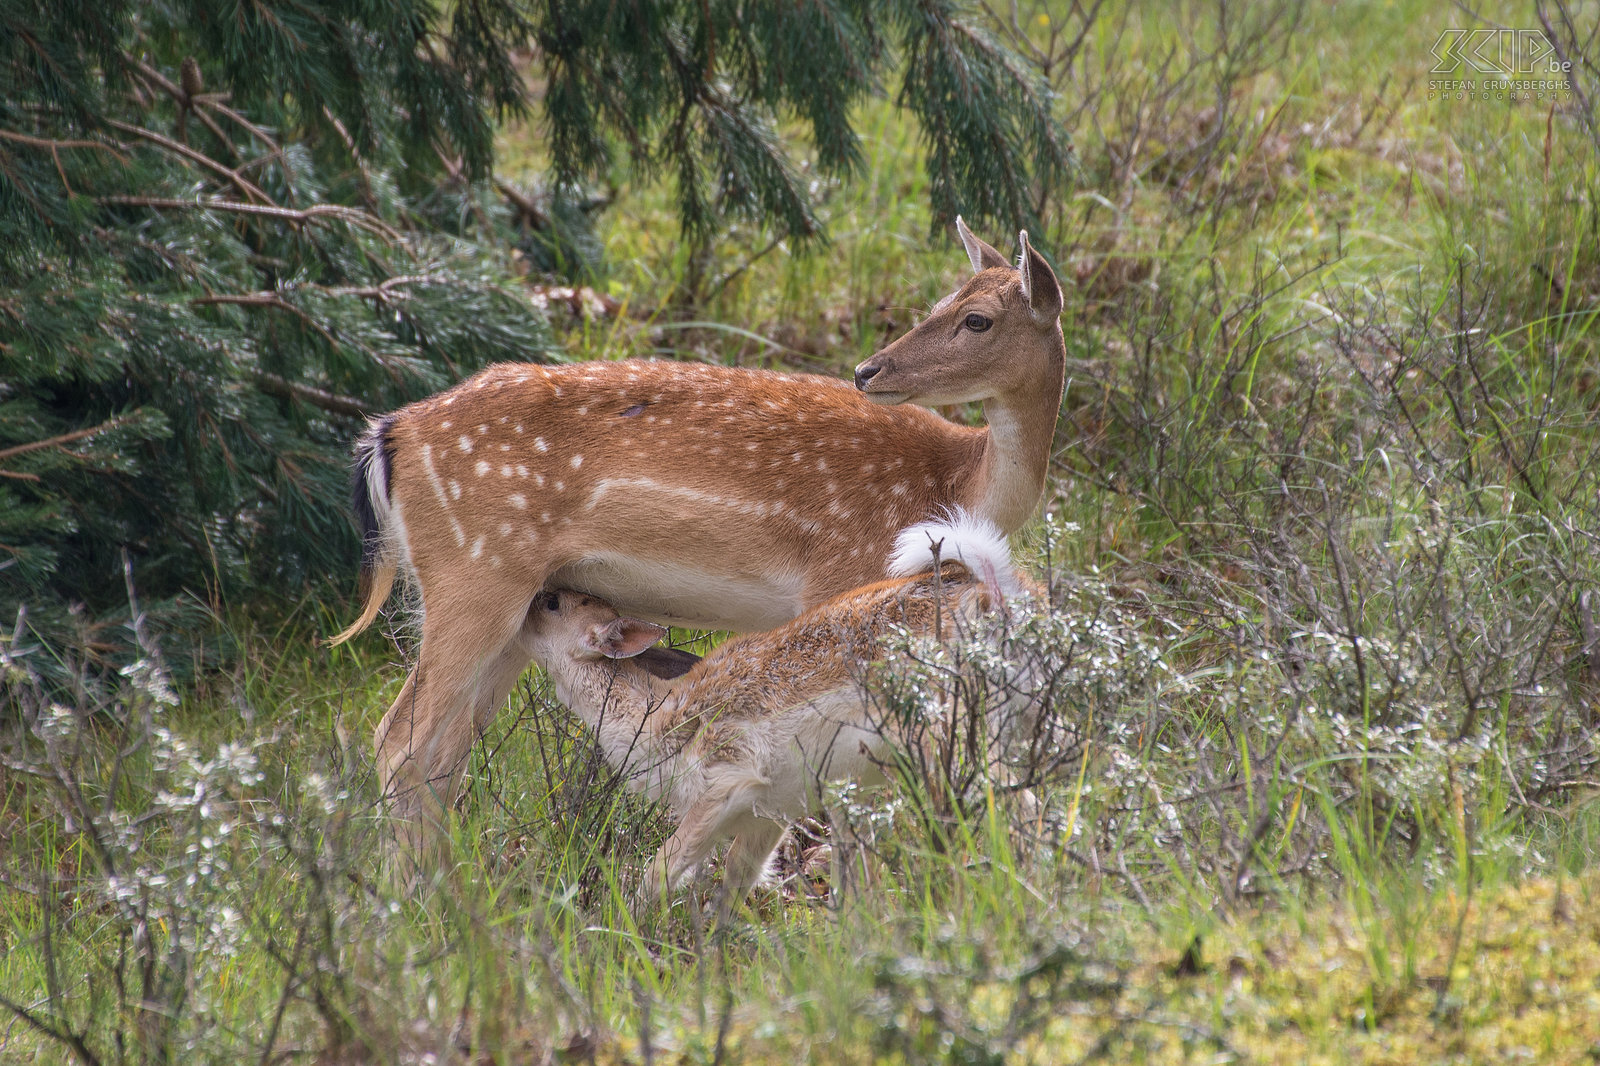 Amsterdamse Waterleidingduinen - Fallow deer with fawn The Amsterdamse Waterleidingduinen is a beautiful nature reserve in the province of North Holland in the Netherlands. It is a dune area with lots of water channels. It has the largest population of fallow deers in the Netherlands. It is estimated that there are 3000 fallow deers. There also foxes, some of them are used to people, roe deers and many birds.  Stefan Cruysberghs